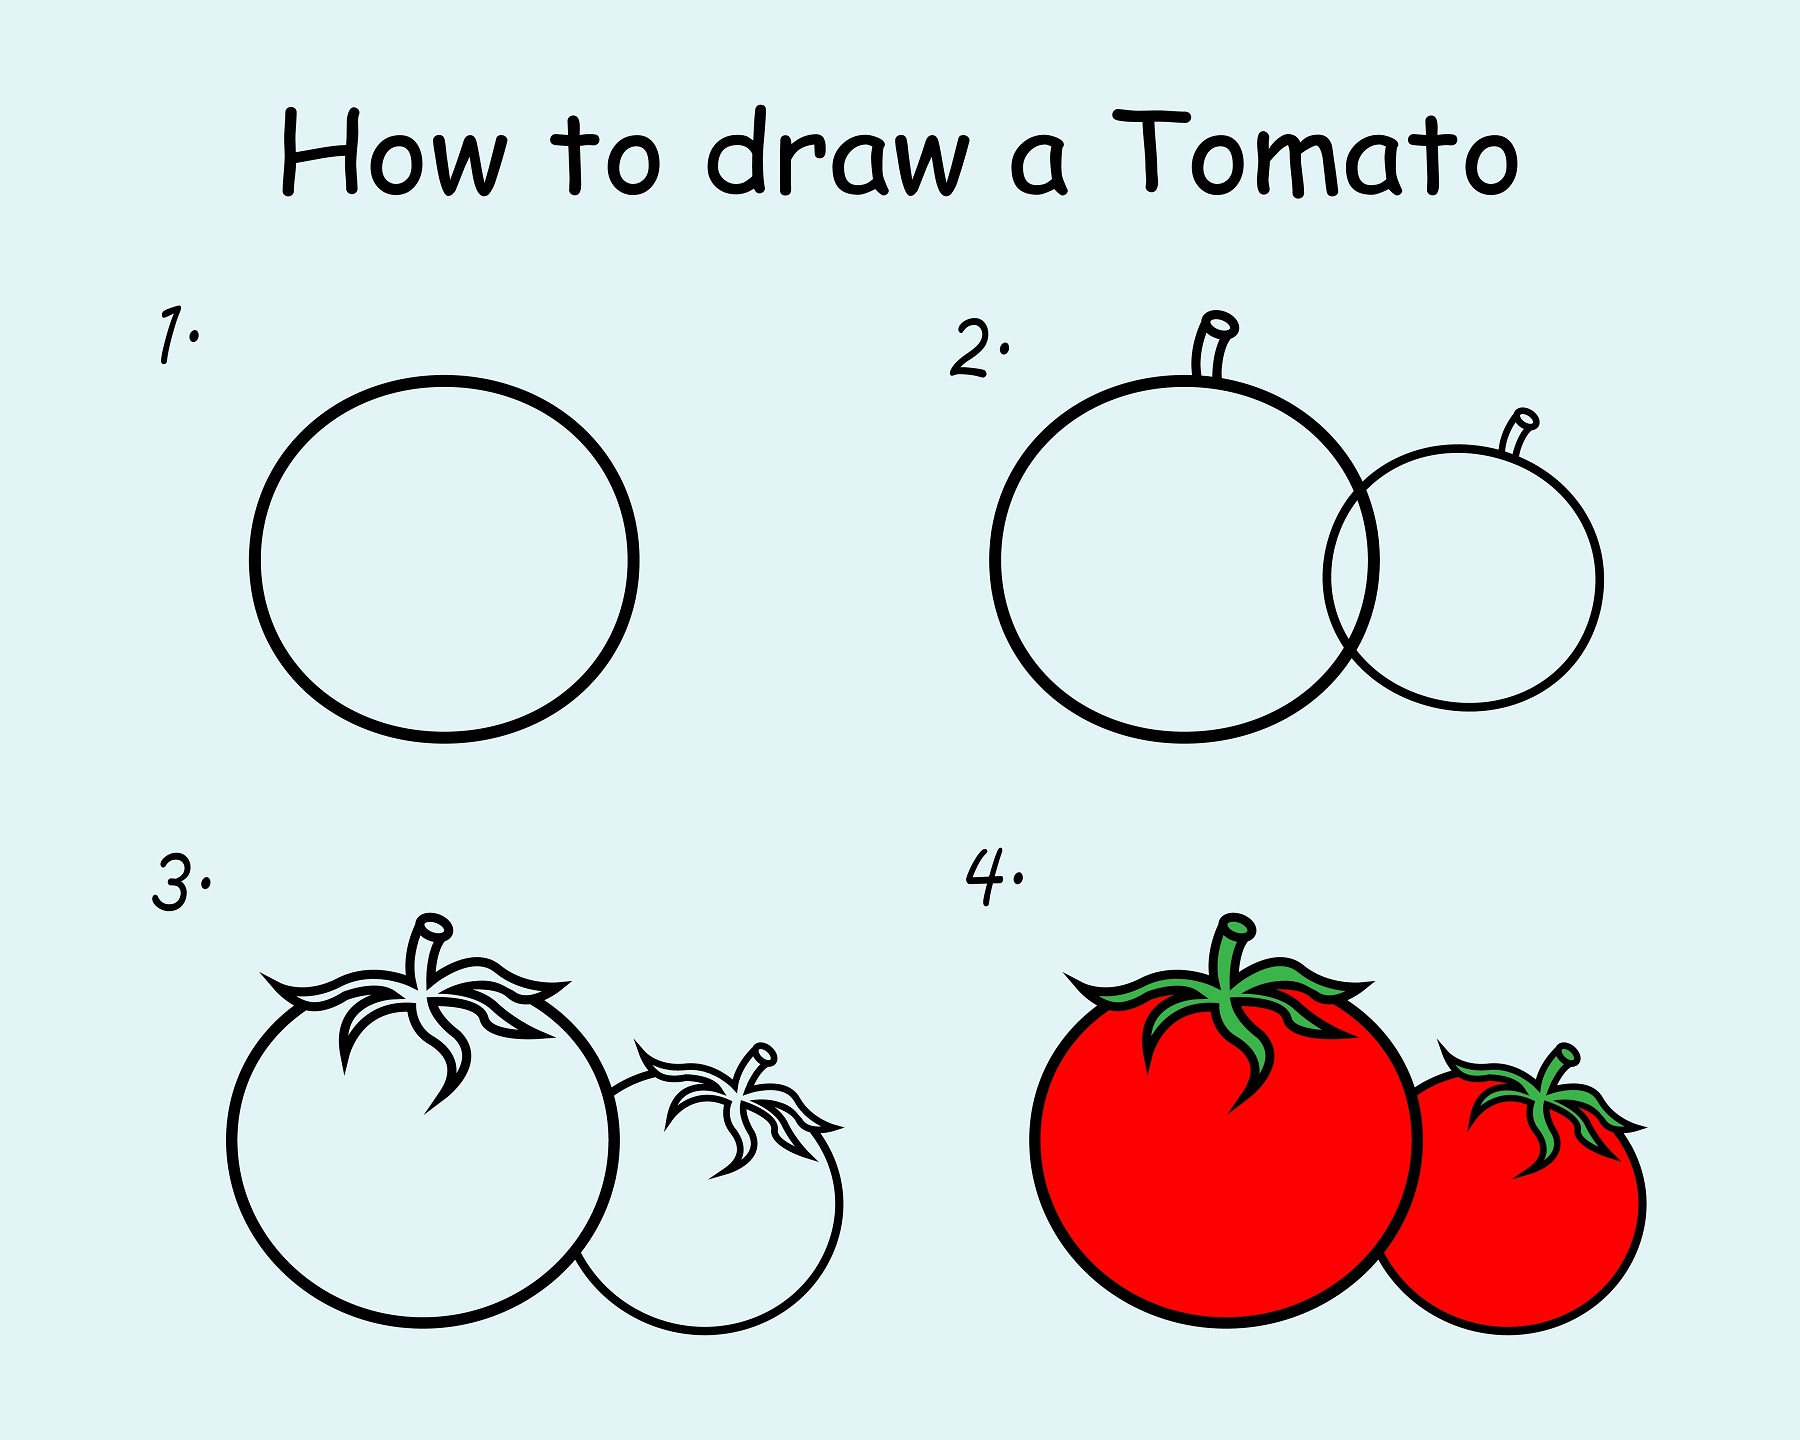 how to draw a tomato step by step